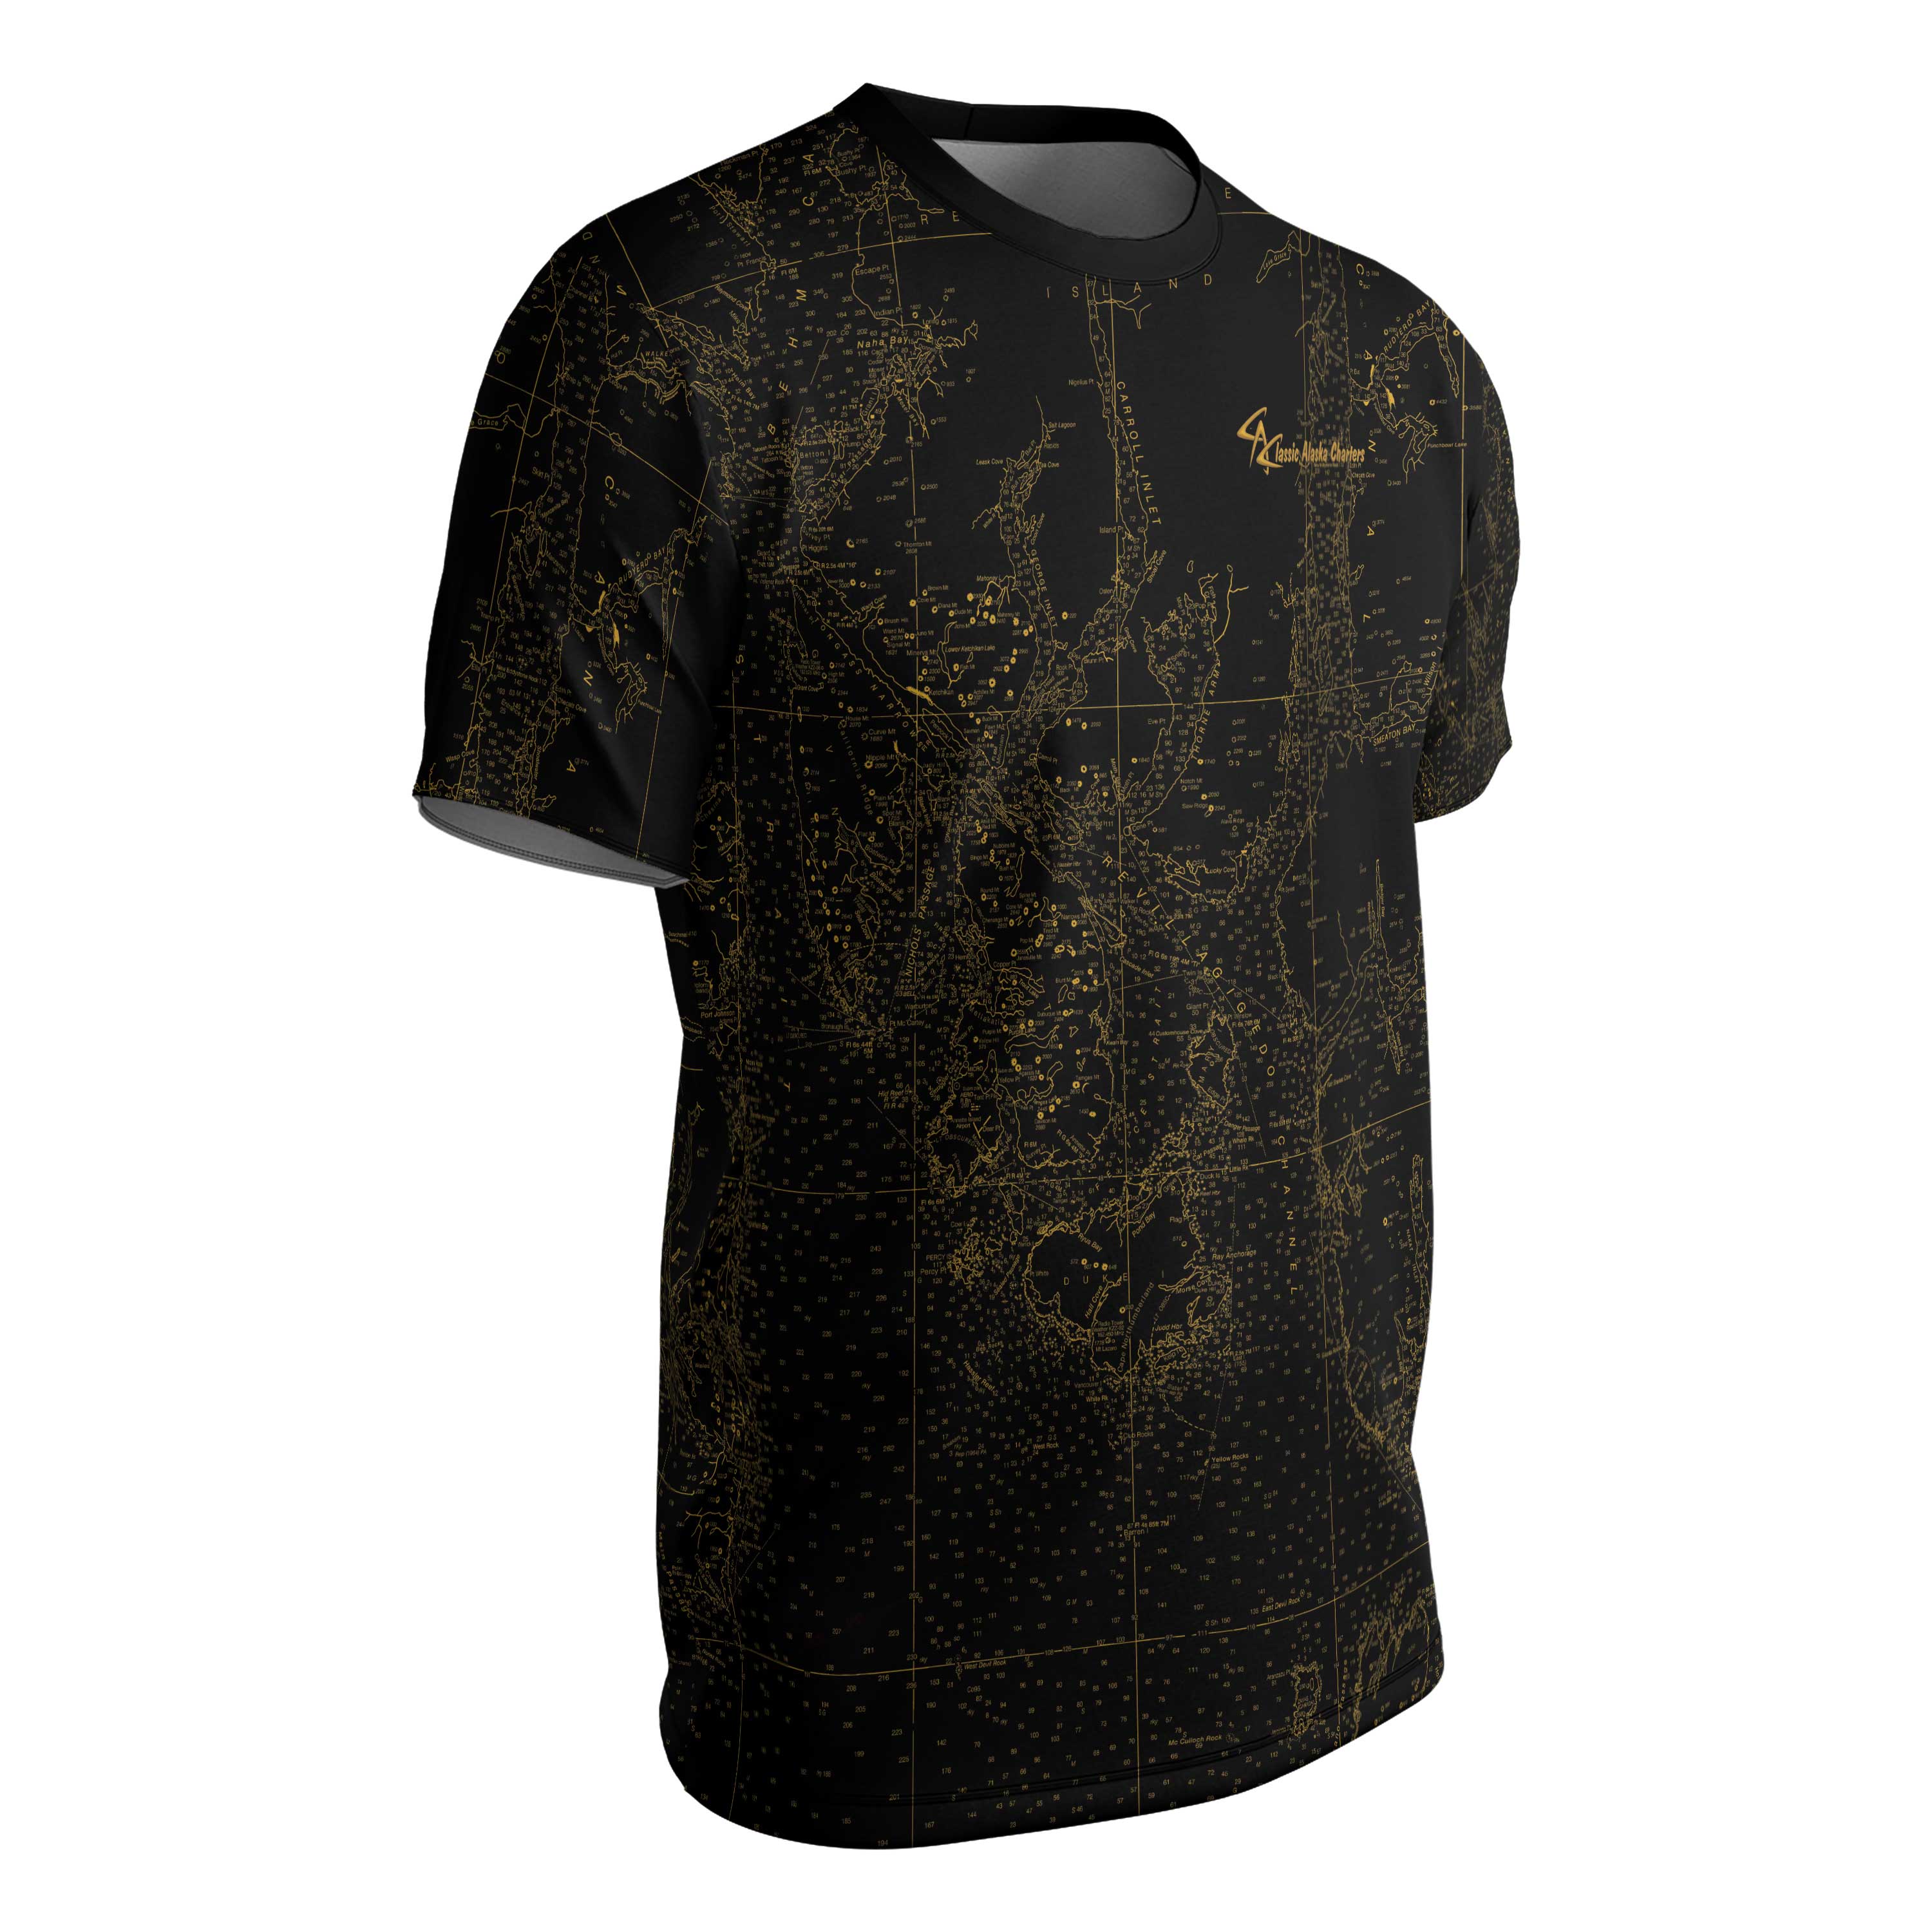 The CAC Midnight Gold Short Sleeve Performance Tee